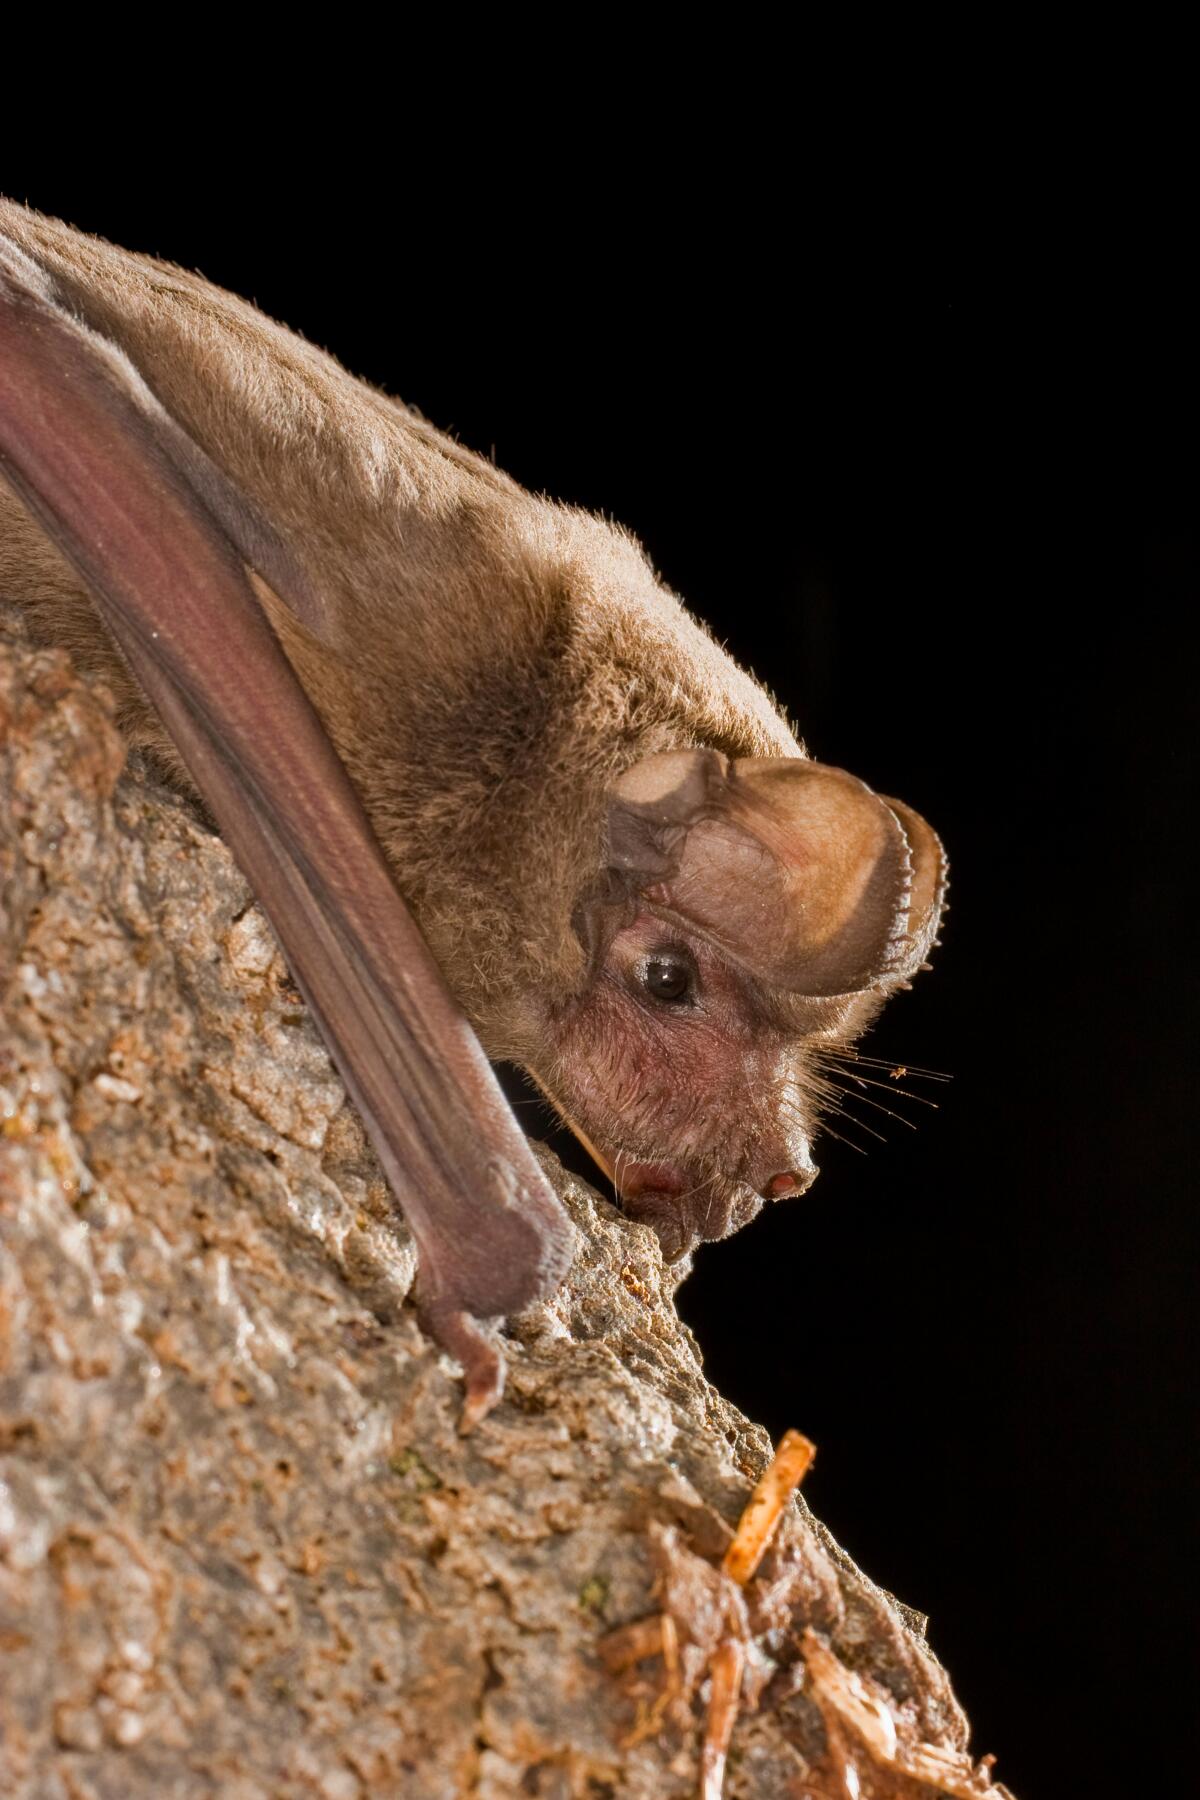 A Mexican free-tailed bat roosting at night.